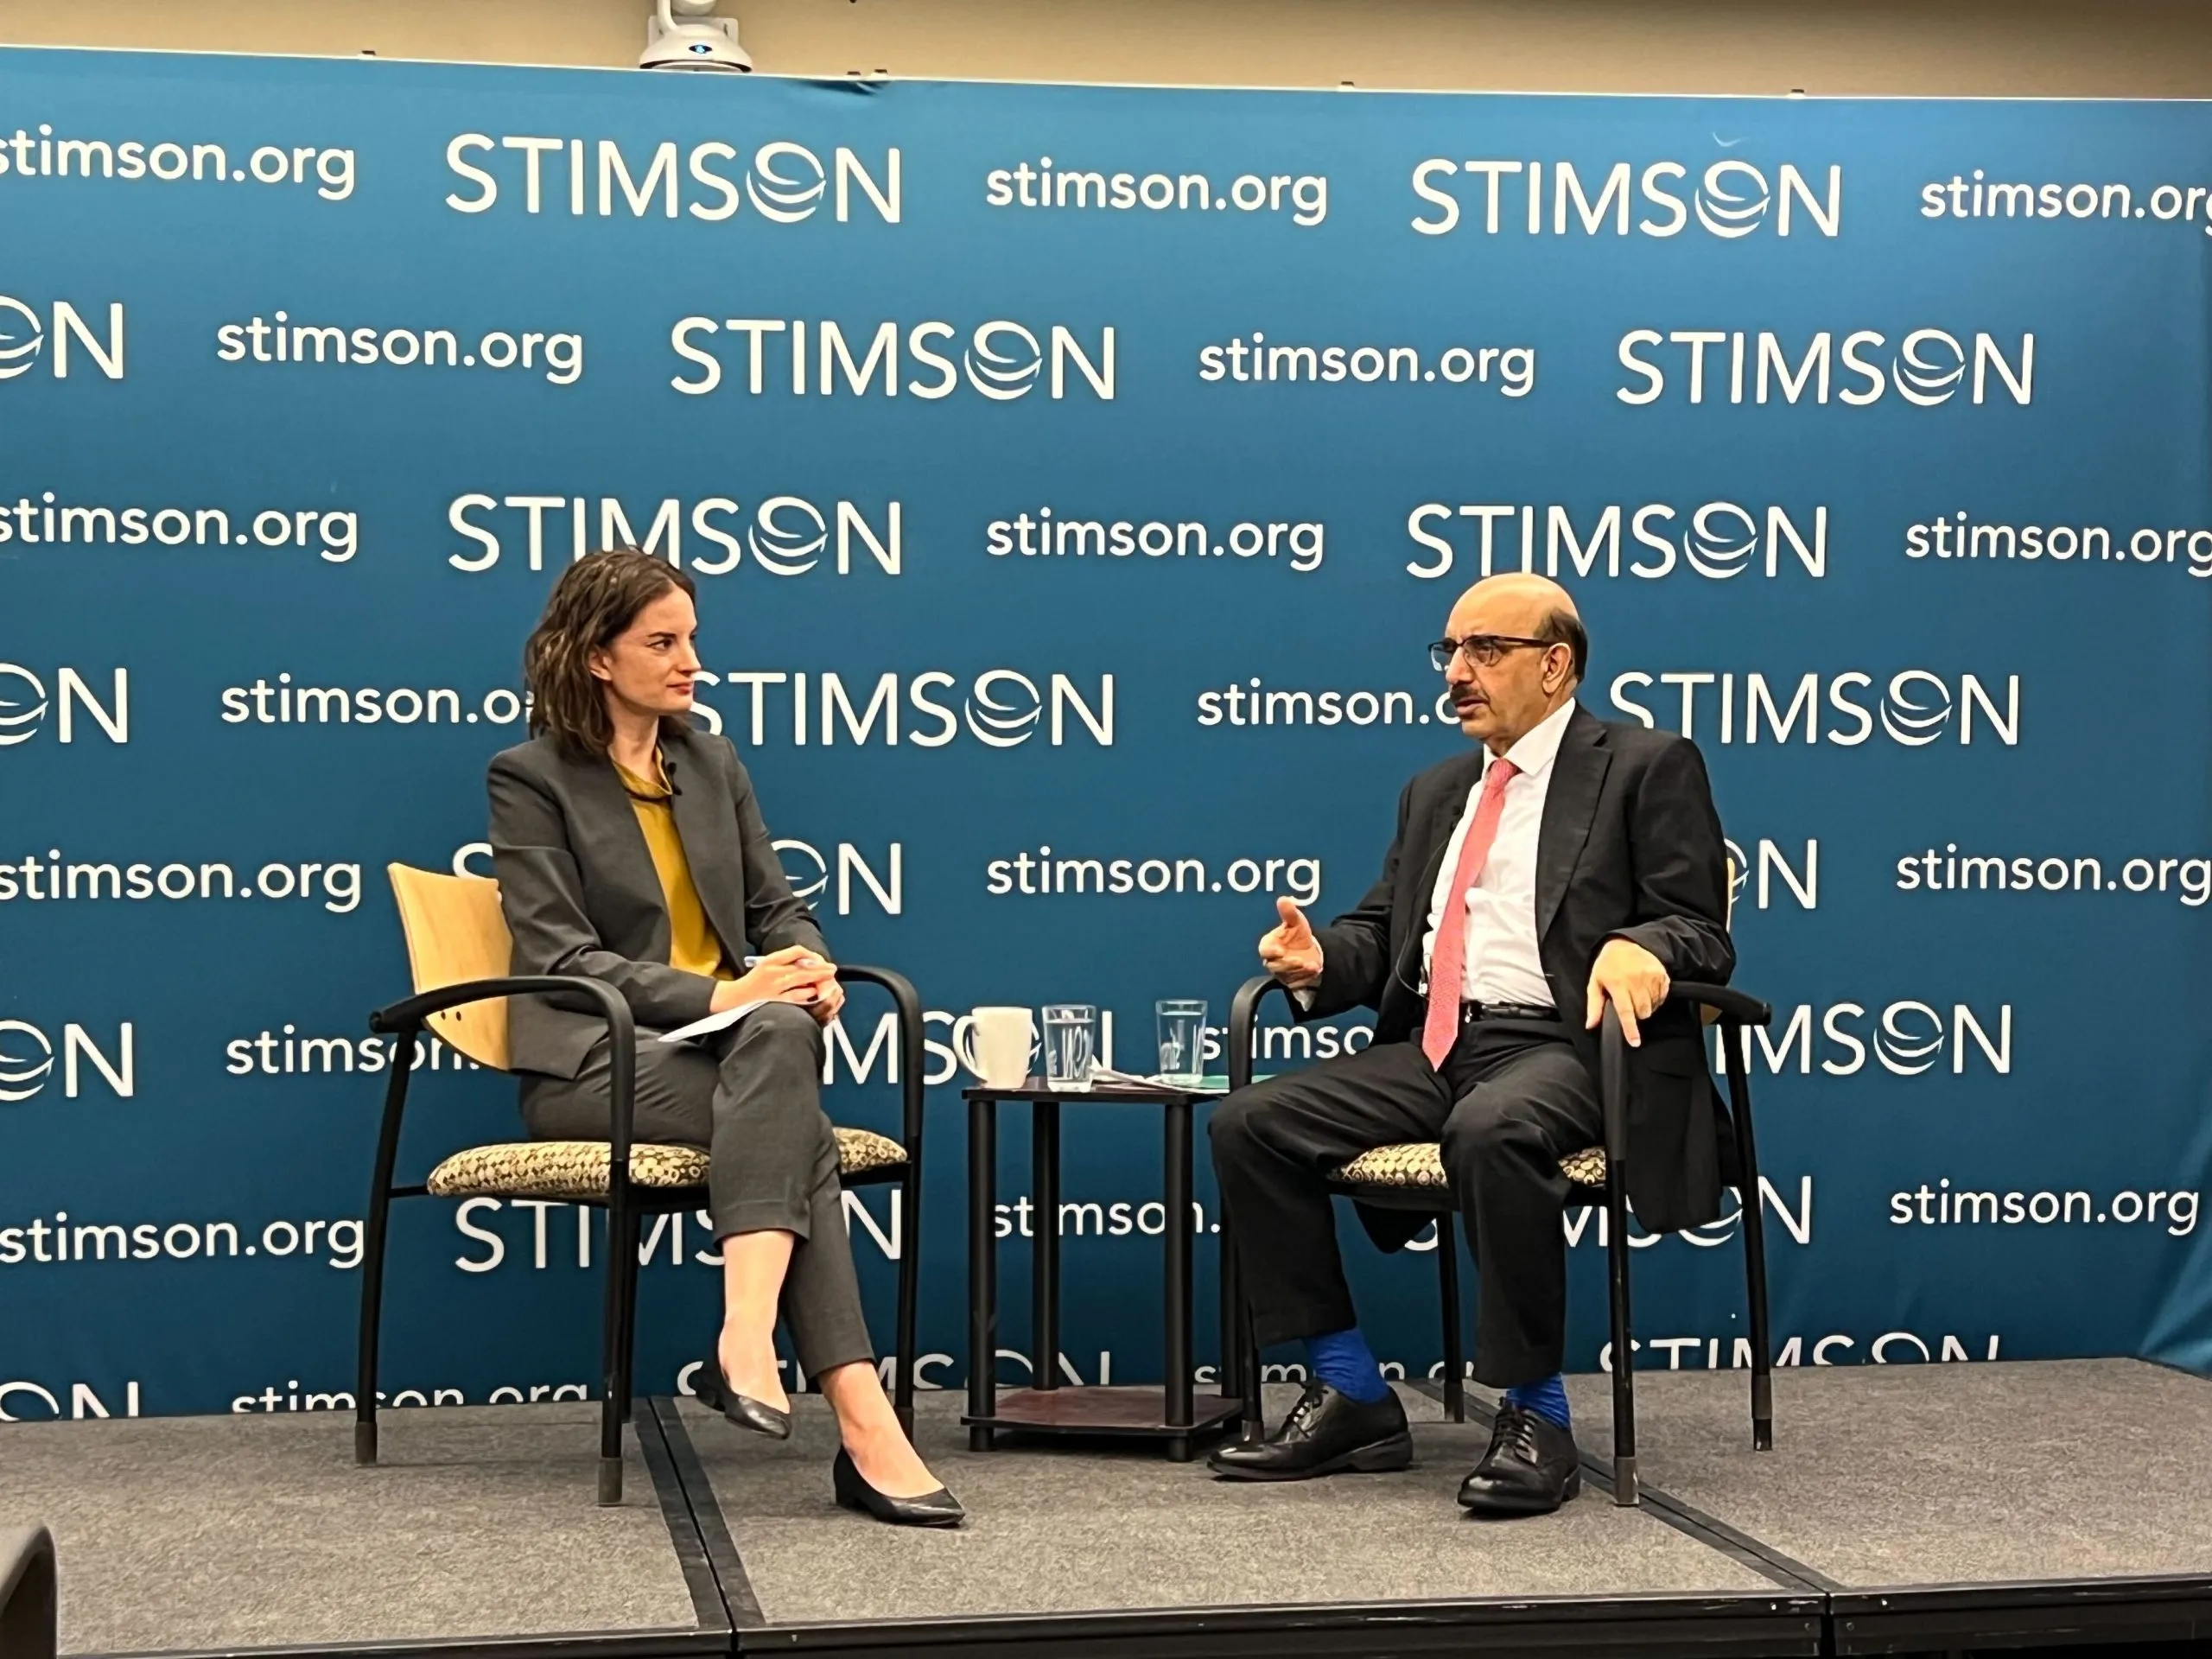 Elizabeth Threlkeld, the Director of the South Asia Program at the Stimson Center (R) with the Ambassador of Pakistan to US, Masood Kahn (L)